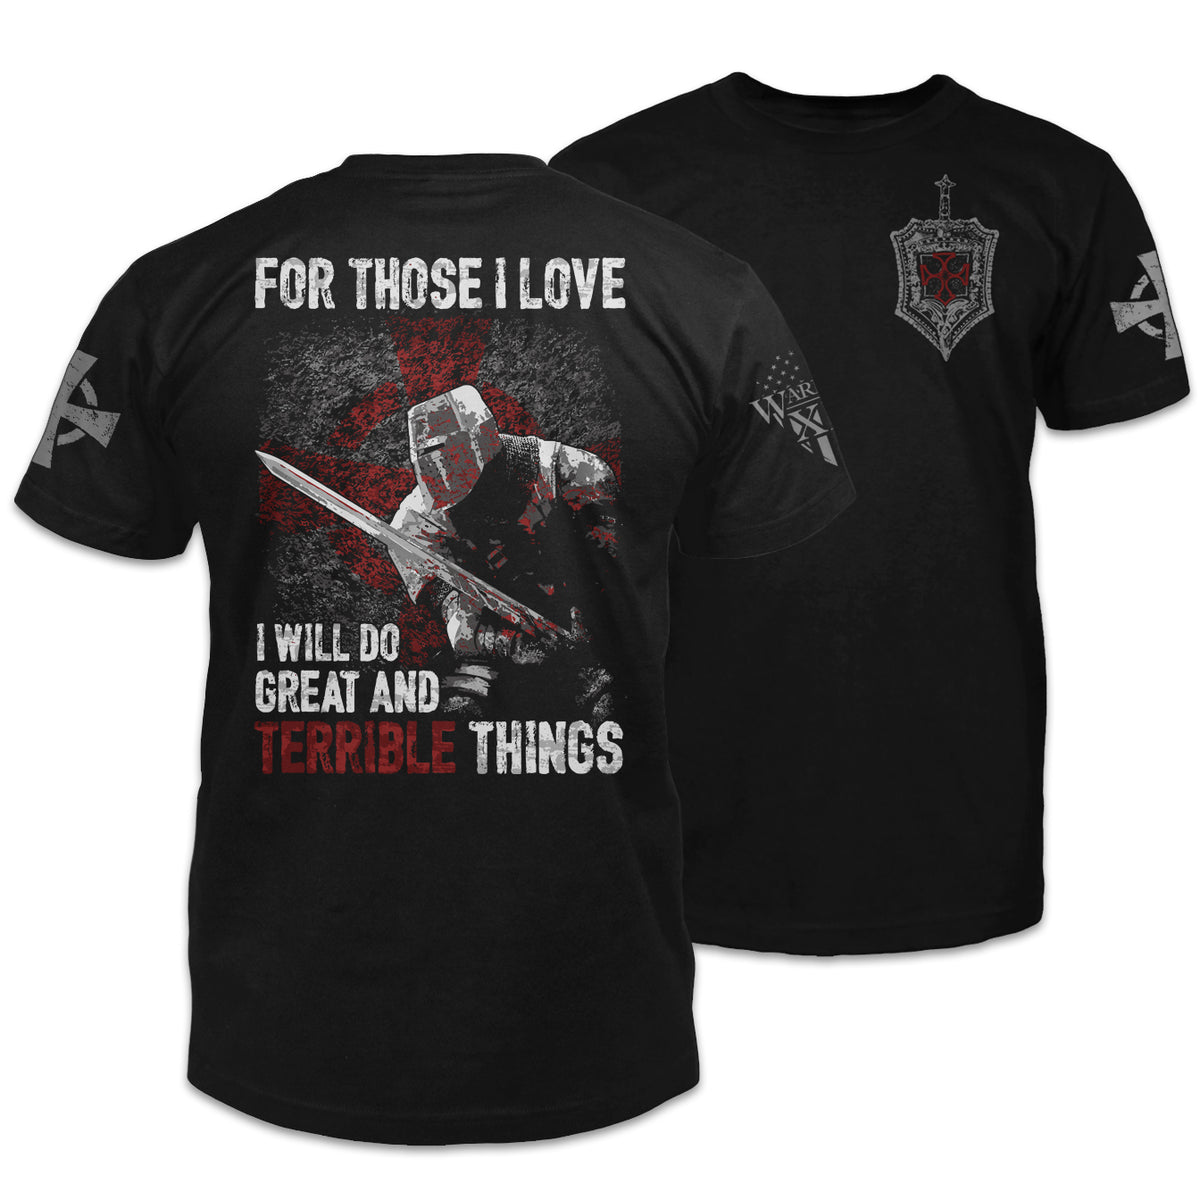 Front & back black t-shirt with the words 'For Those I Love, I Will Do Great And Terrible Things" with a knights templar ready for battle printed on the shirt.